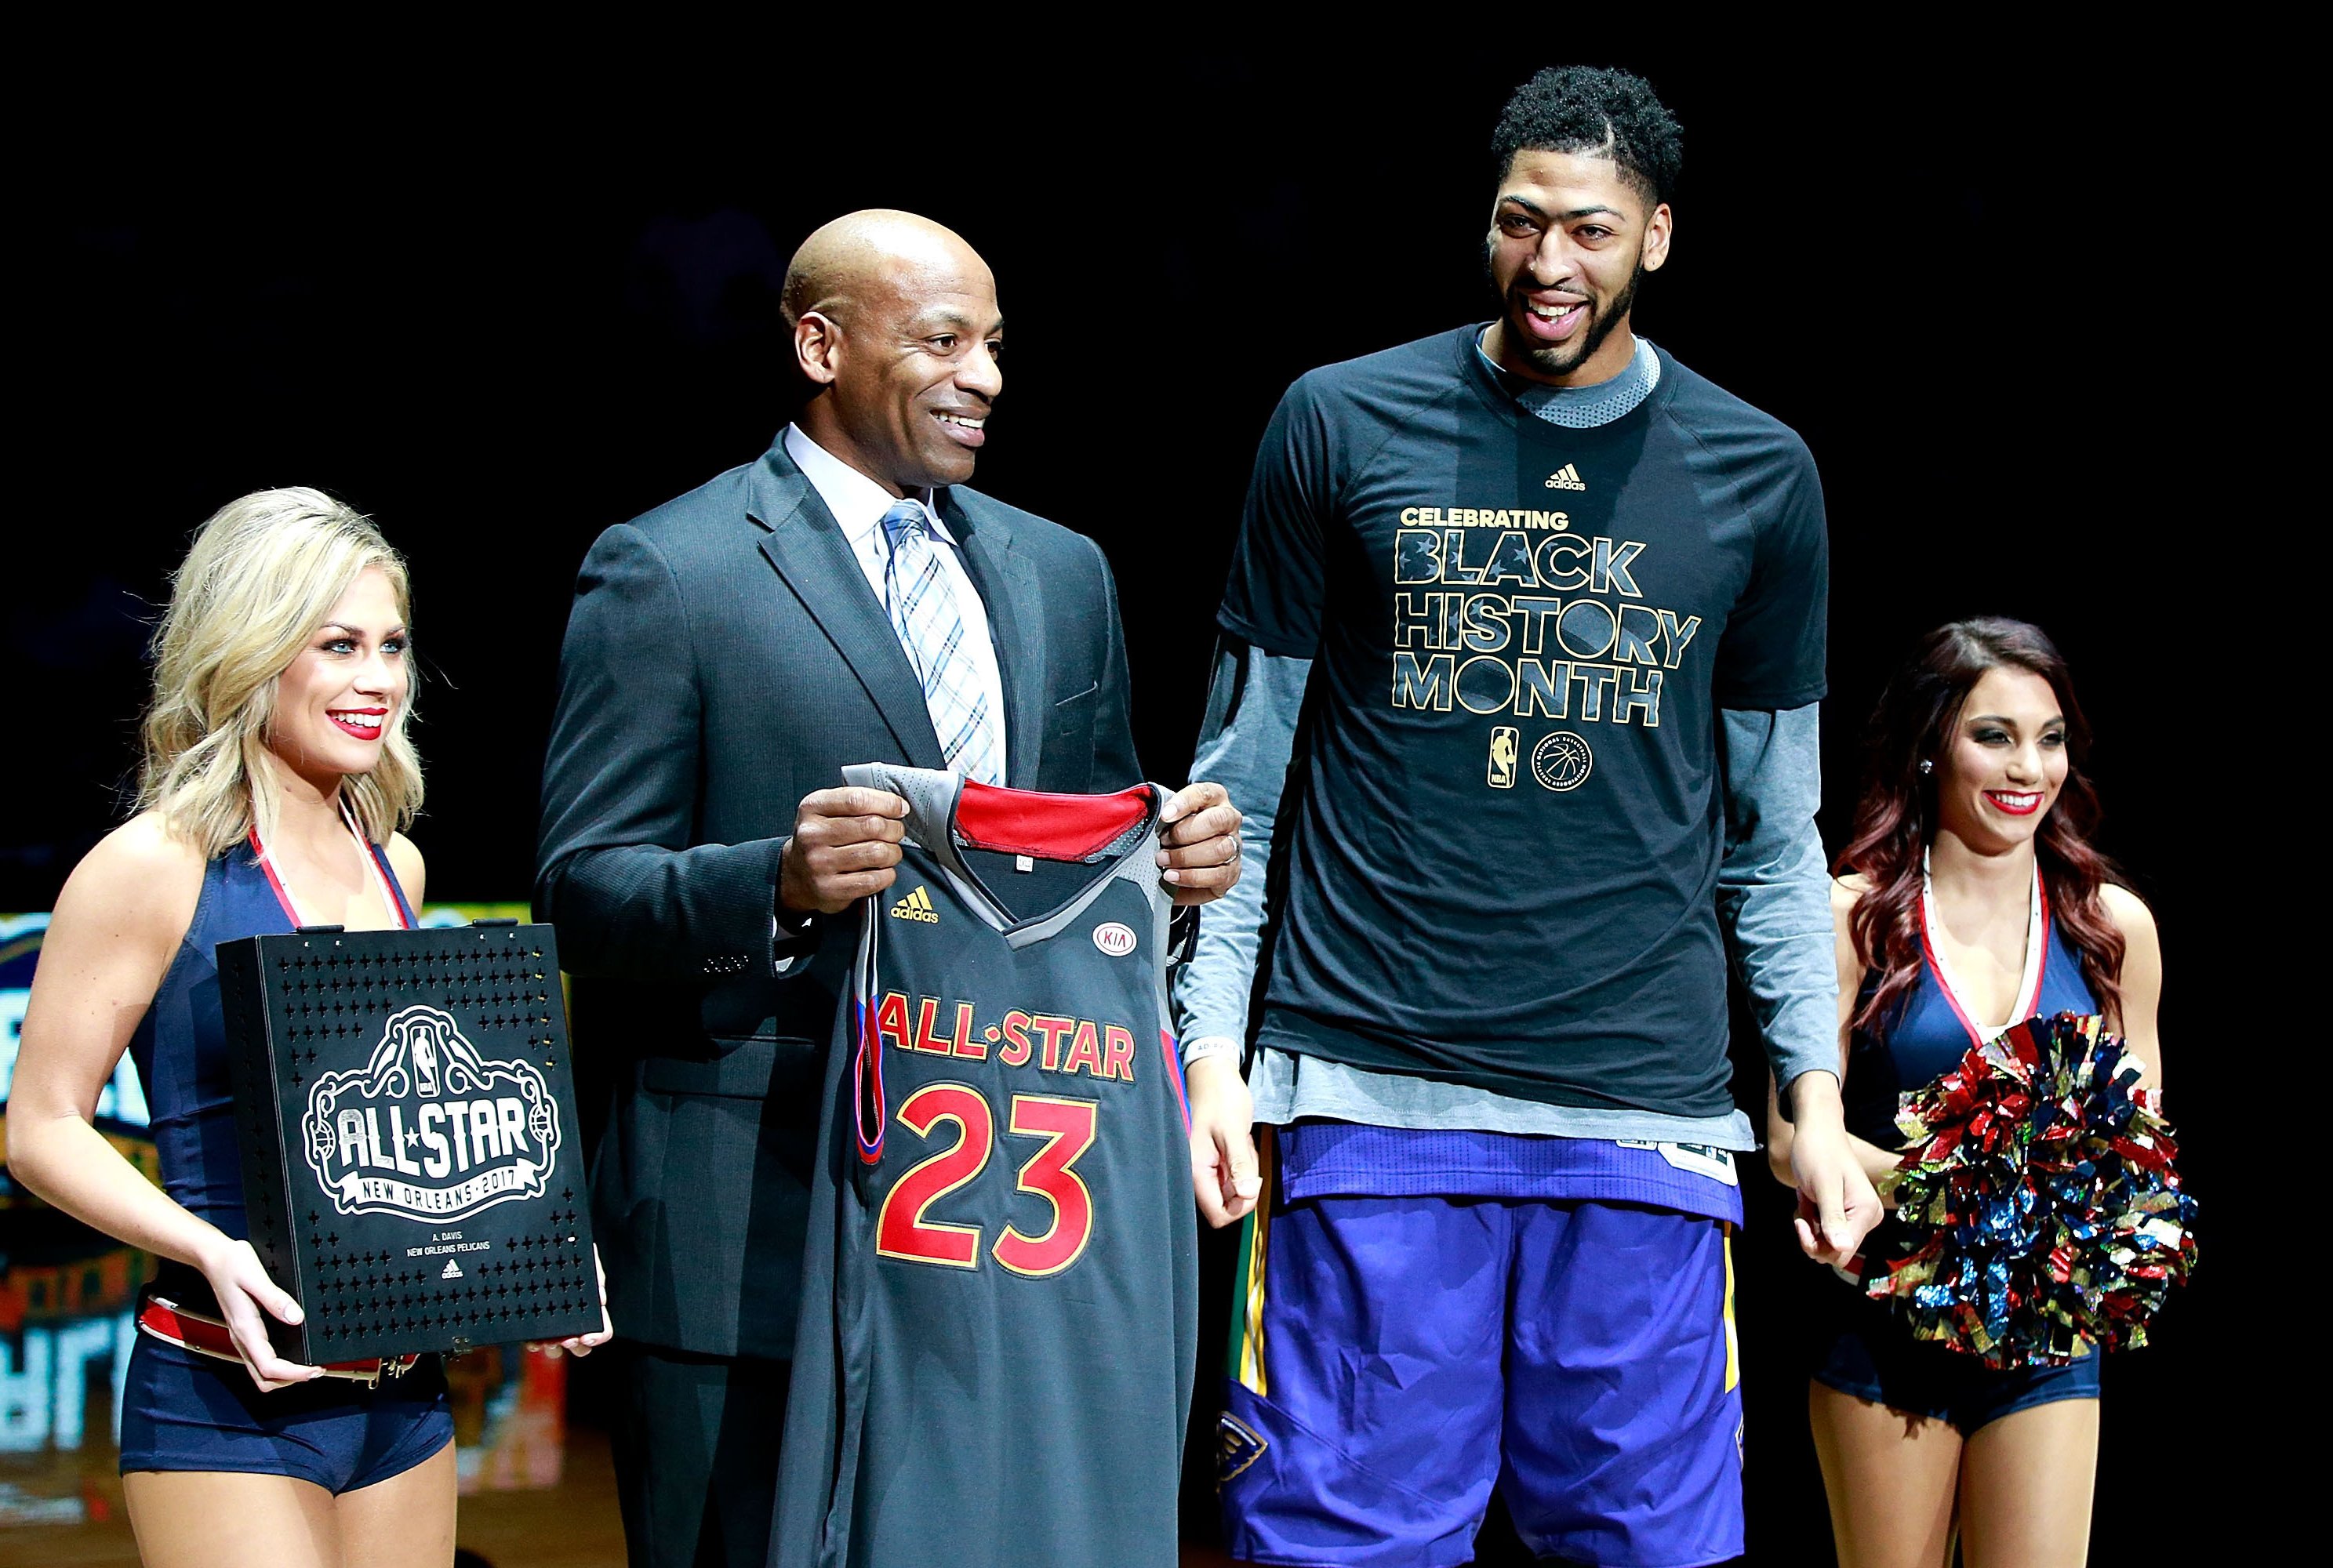 During Black History Month, all NBA - New Orleans Pelicans